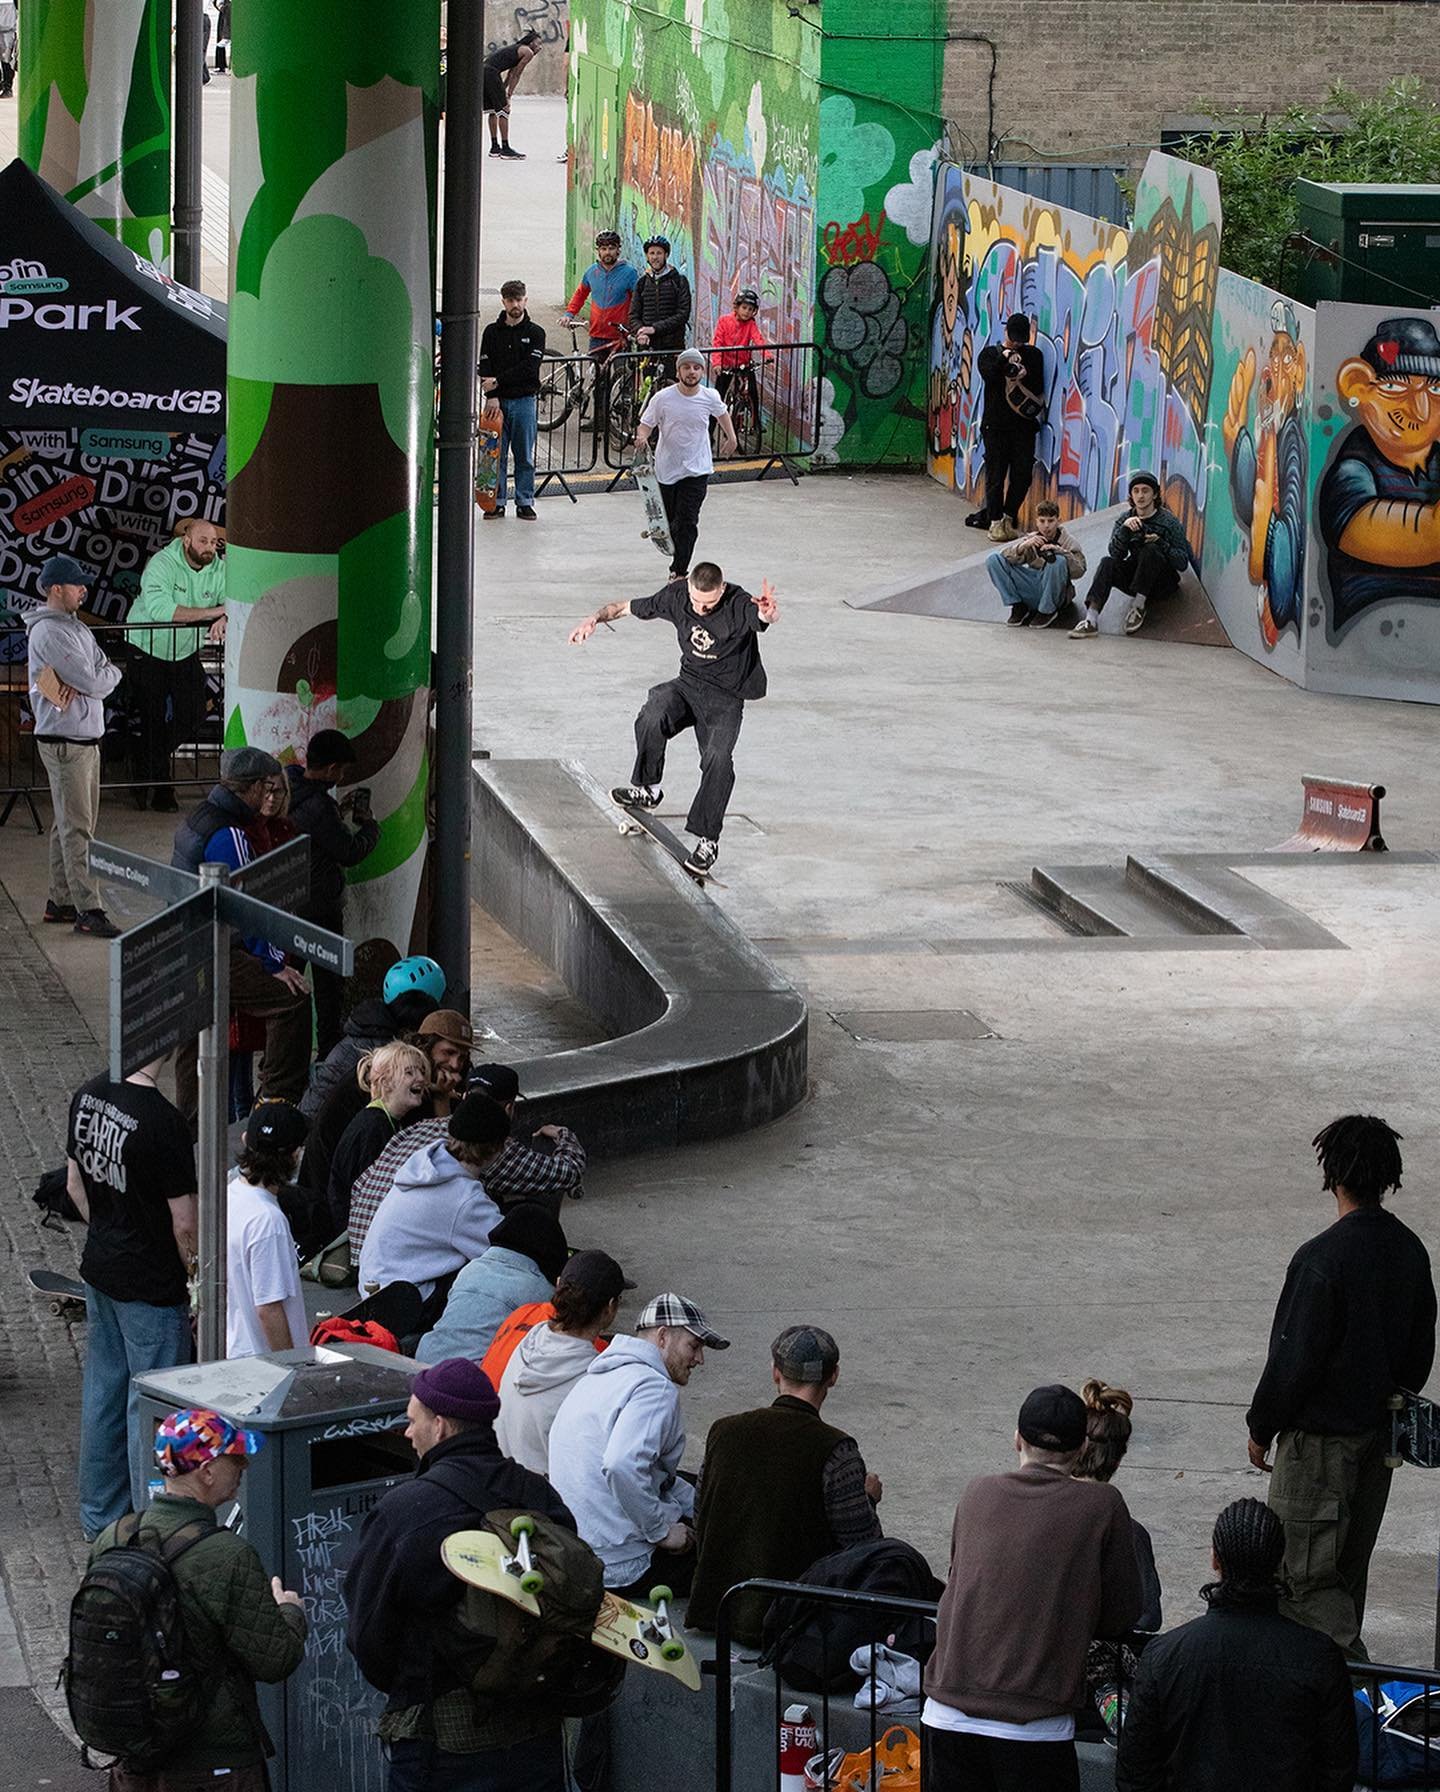 Just a few moments from the Flip Park Notts event we hosted with @samsunguk &amp; @skateboardgb 2 weeks ago, which saw approx. 800+ people attend a day of free skate coaching, design &amp; photography workshops, panel talks, yoga, a big skate jam &am